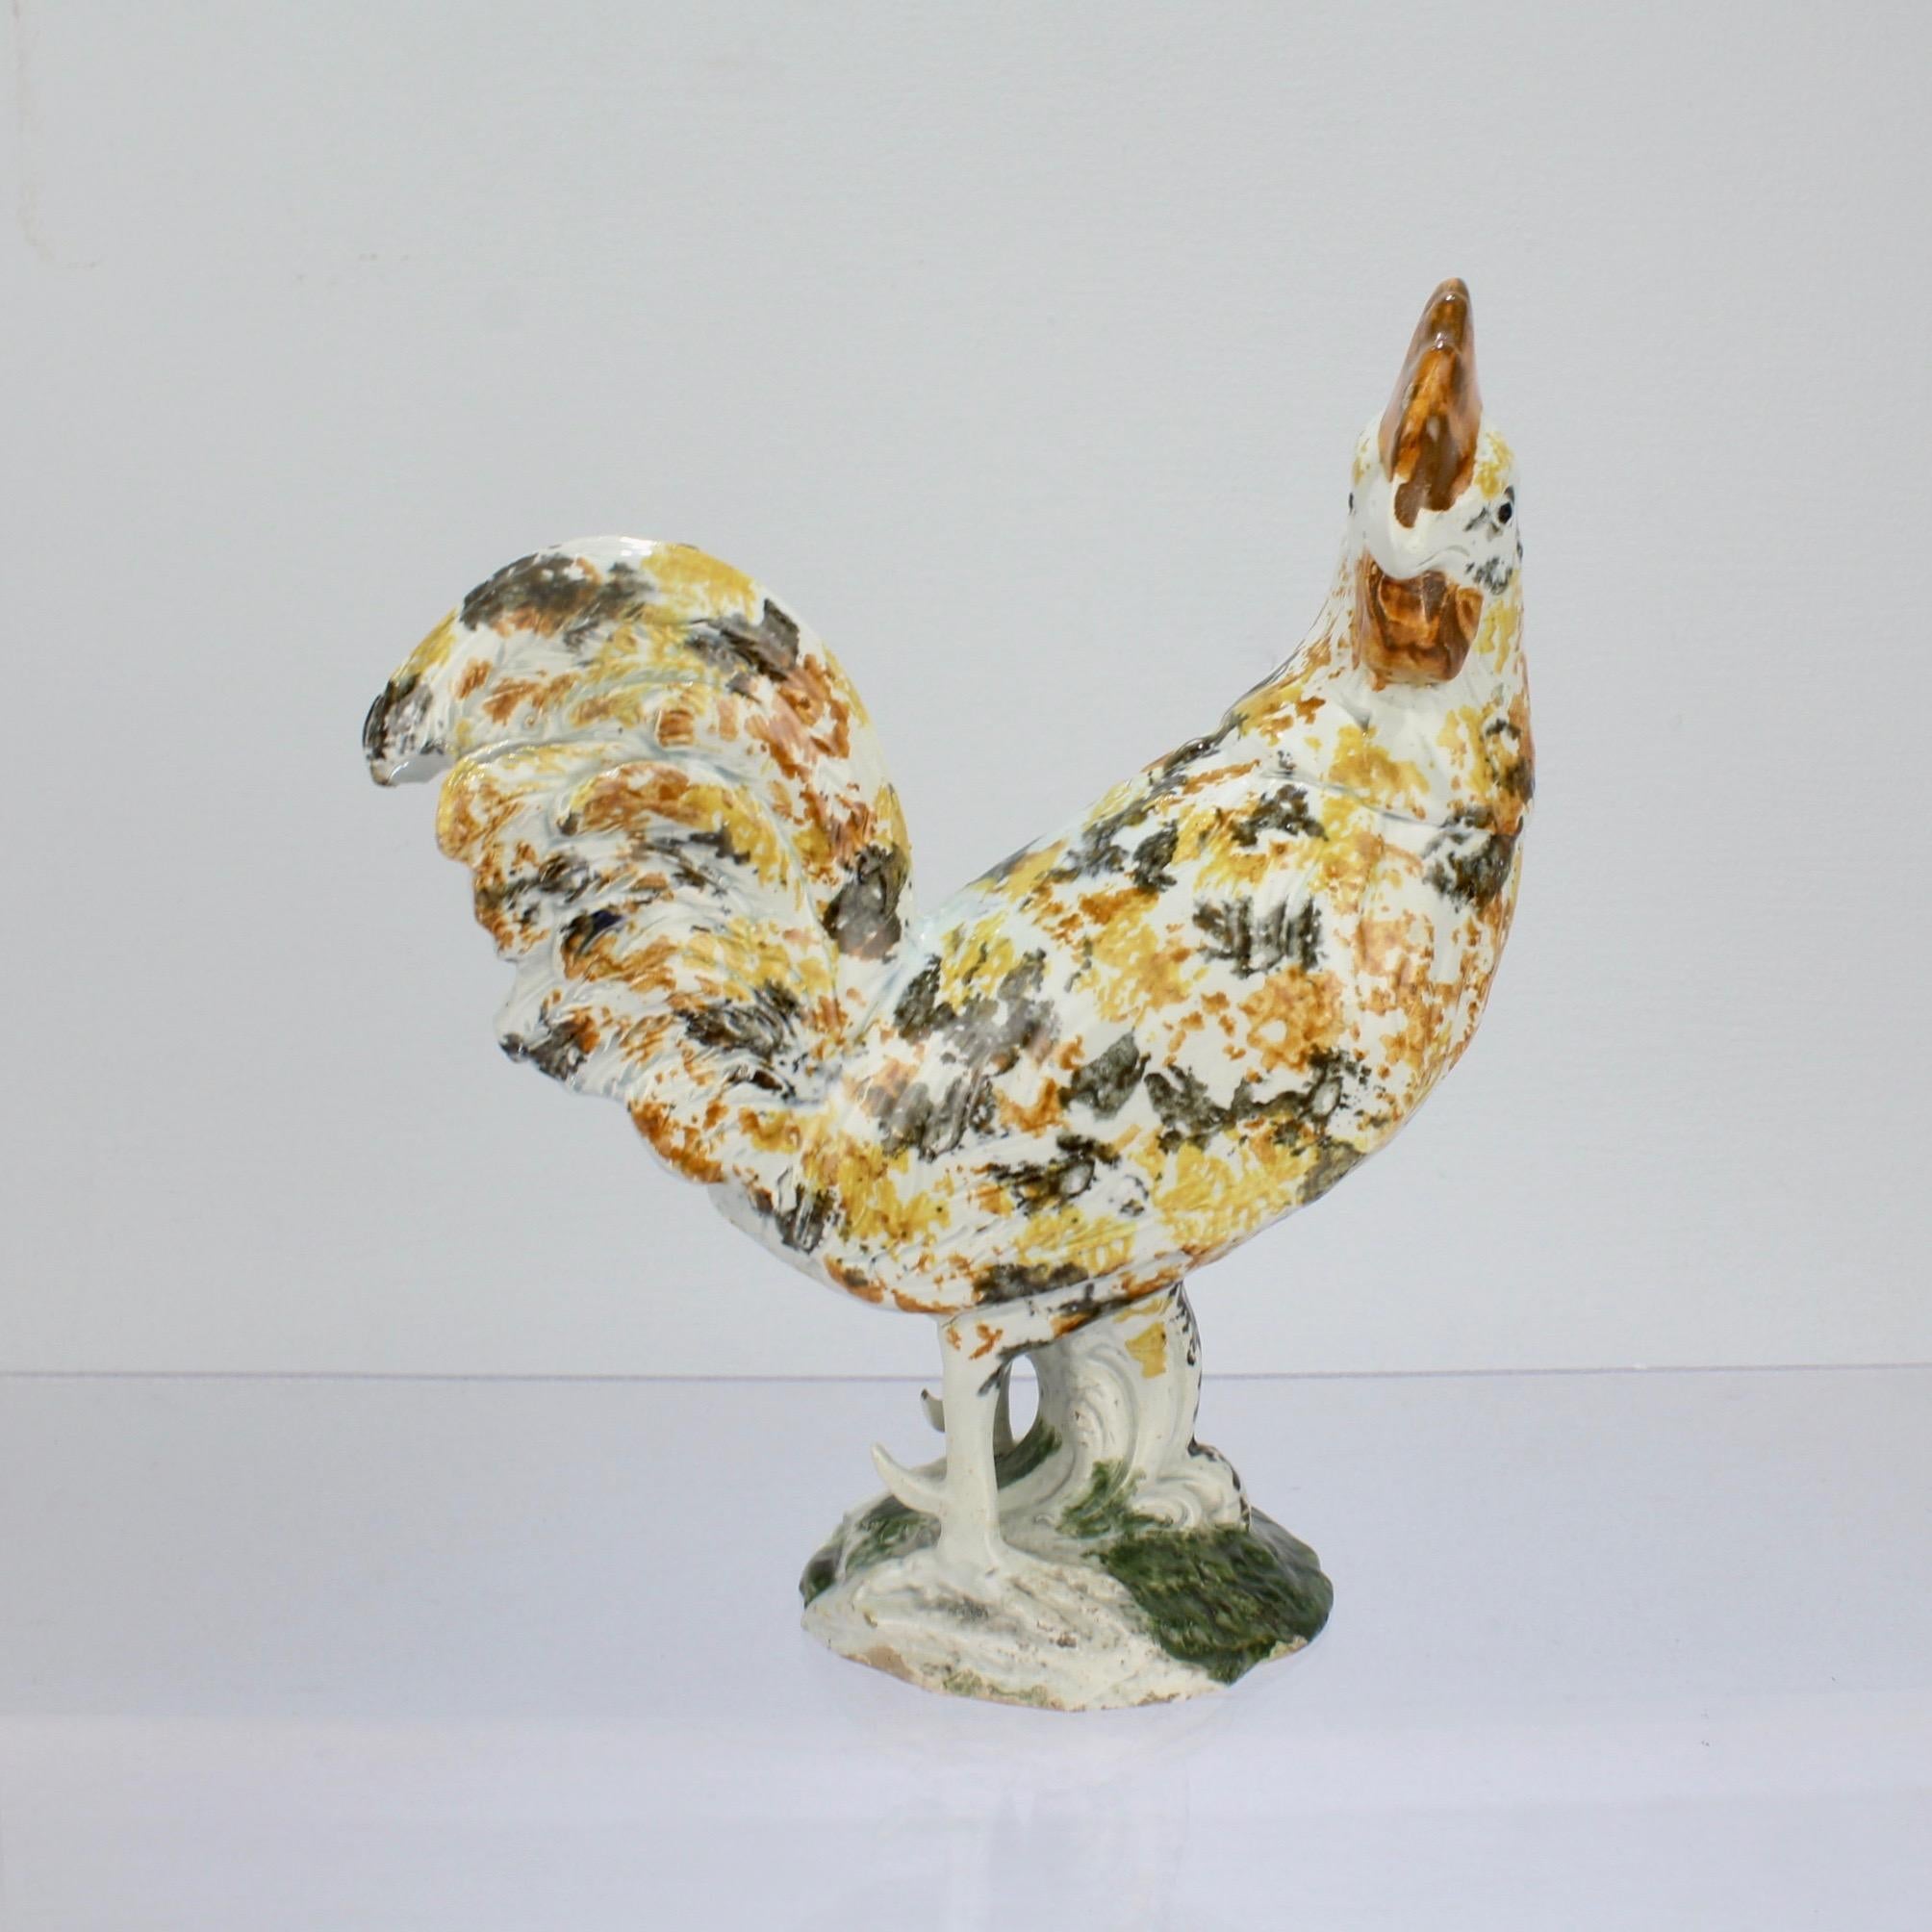 Country Antique English Staffordshire Prattware Pottery Rooster or Cockrel Figurine For Sale